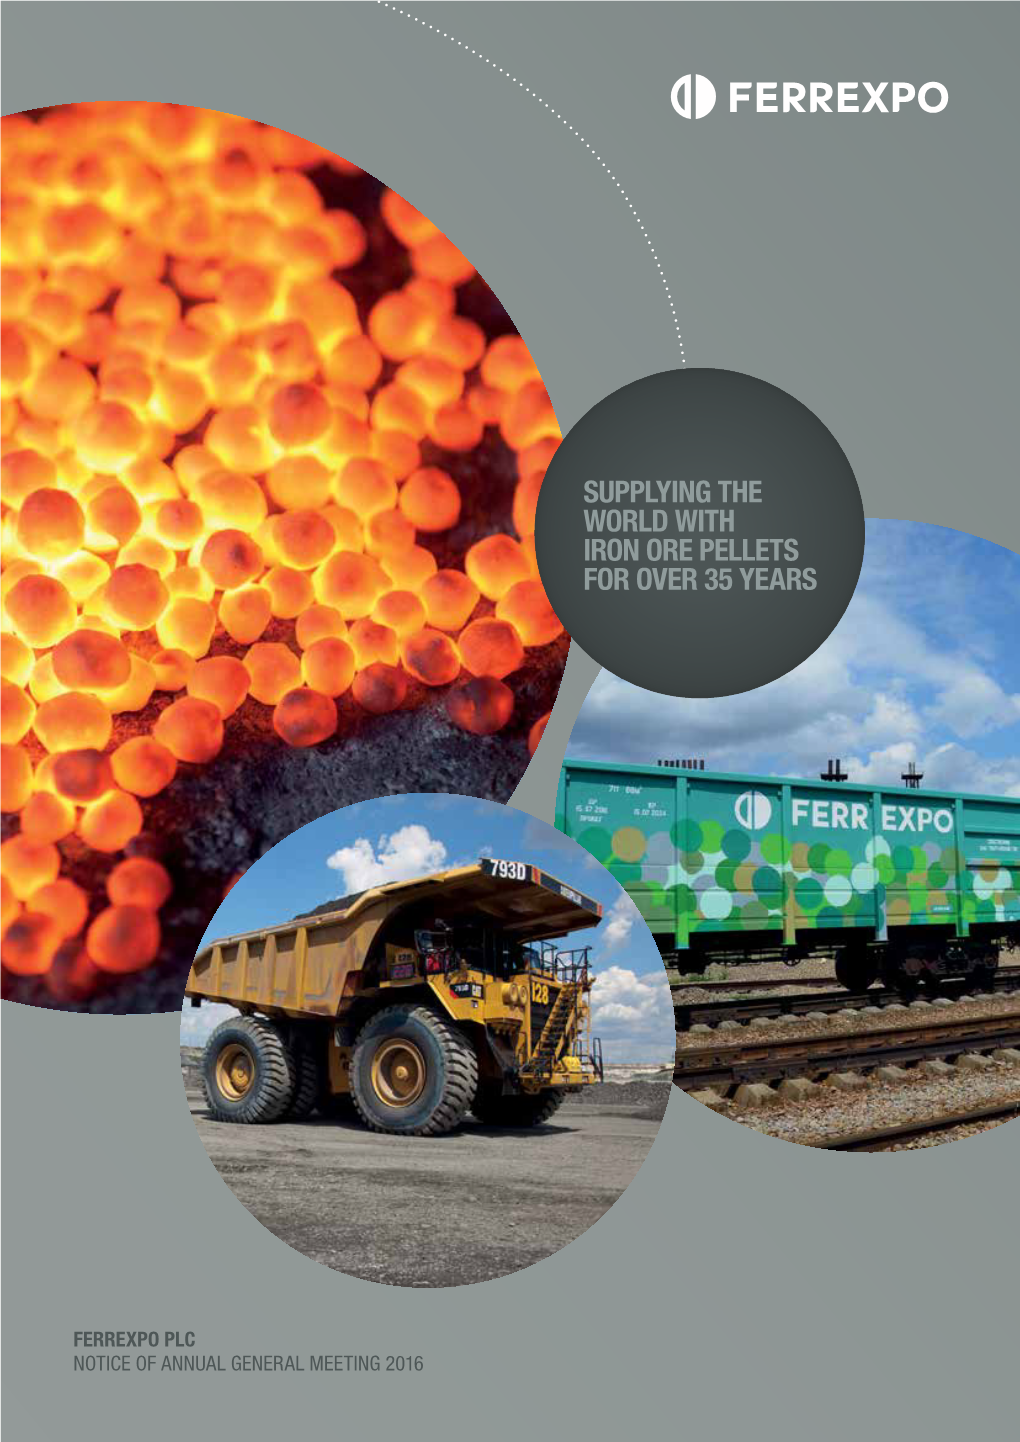 Supplying the World with Iron Ore Pellets for Over 35 Years